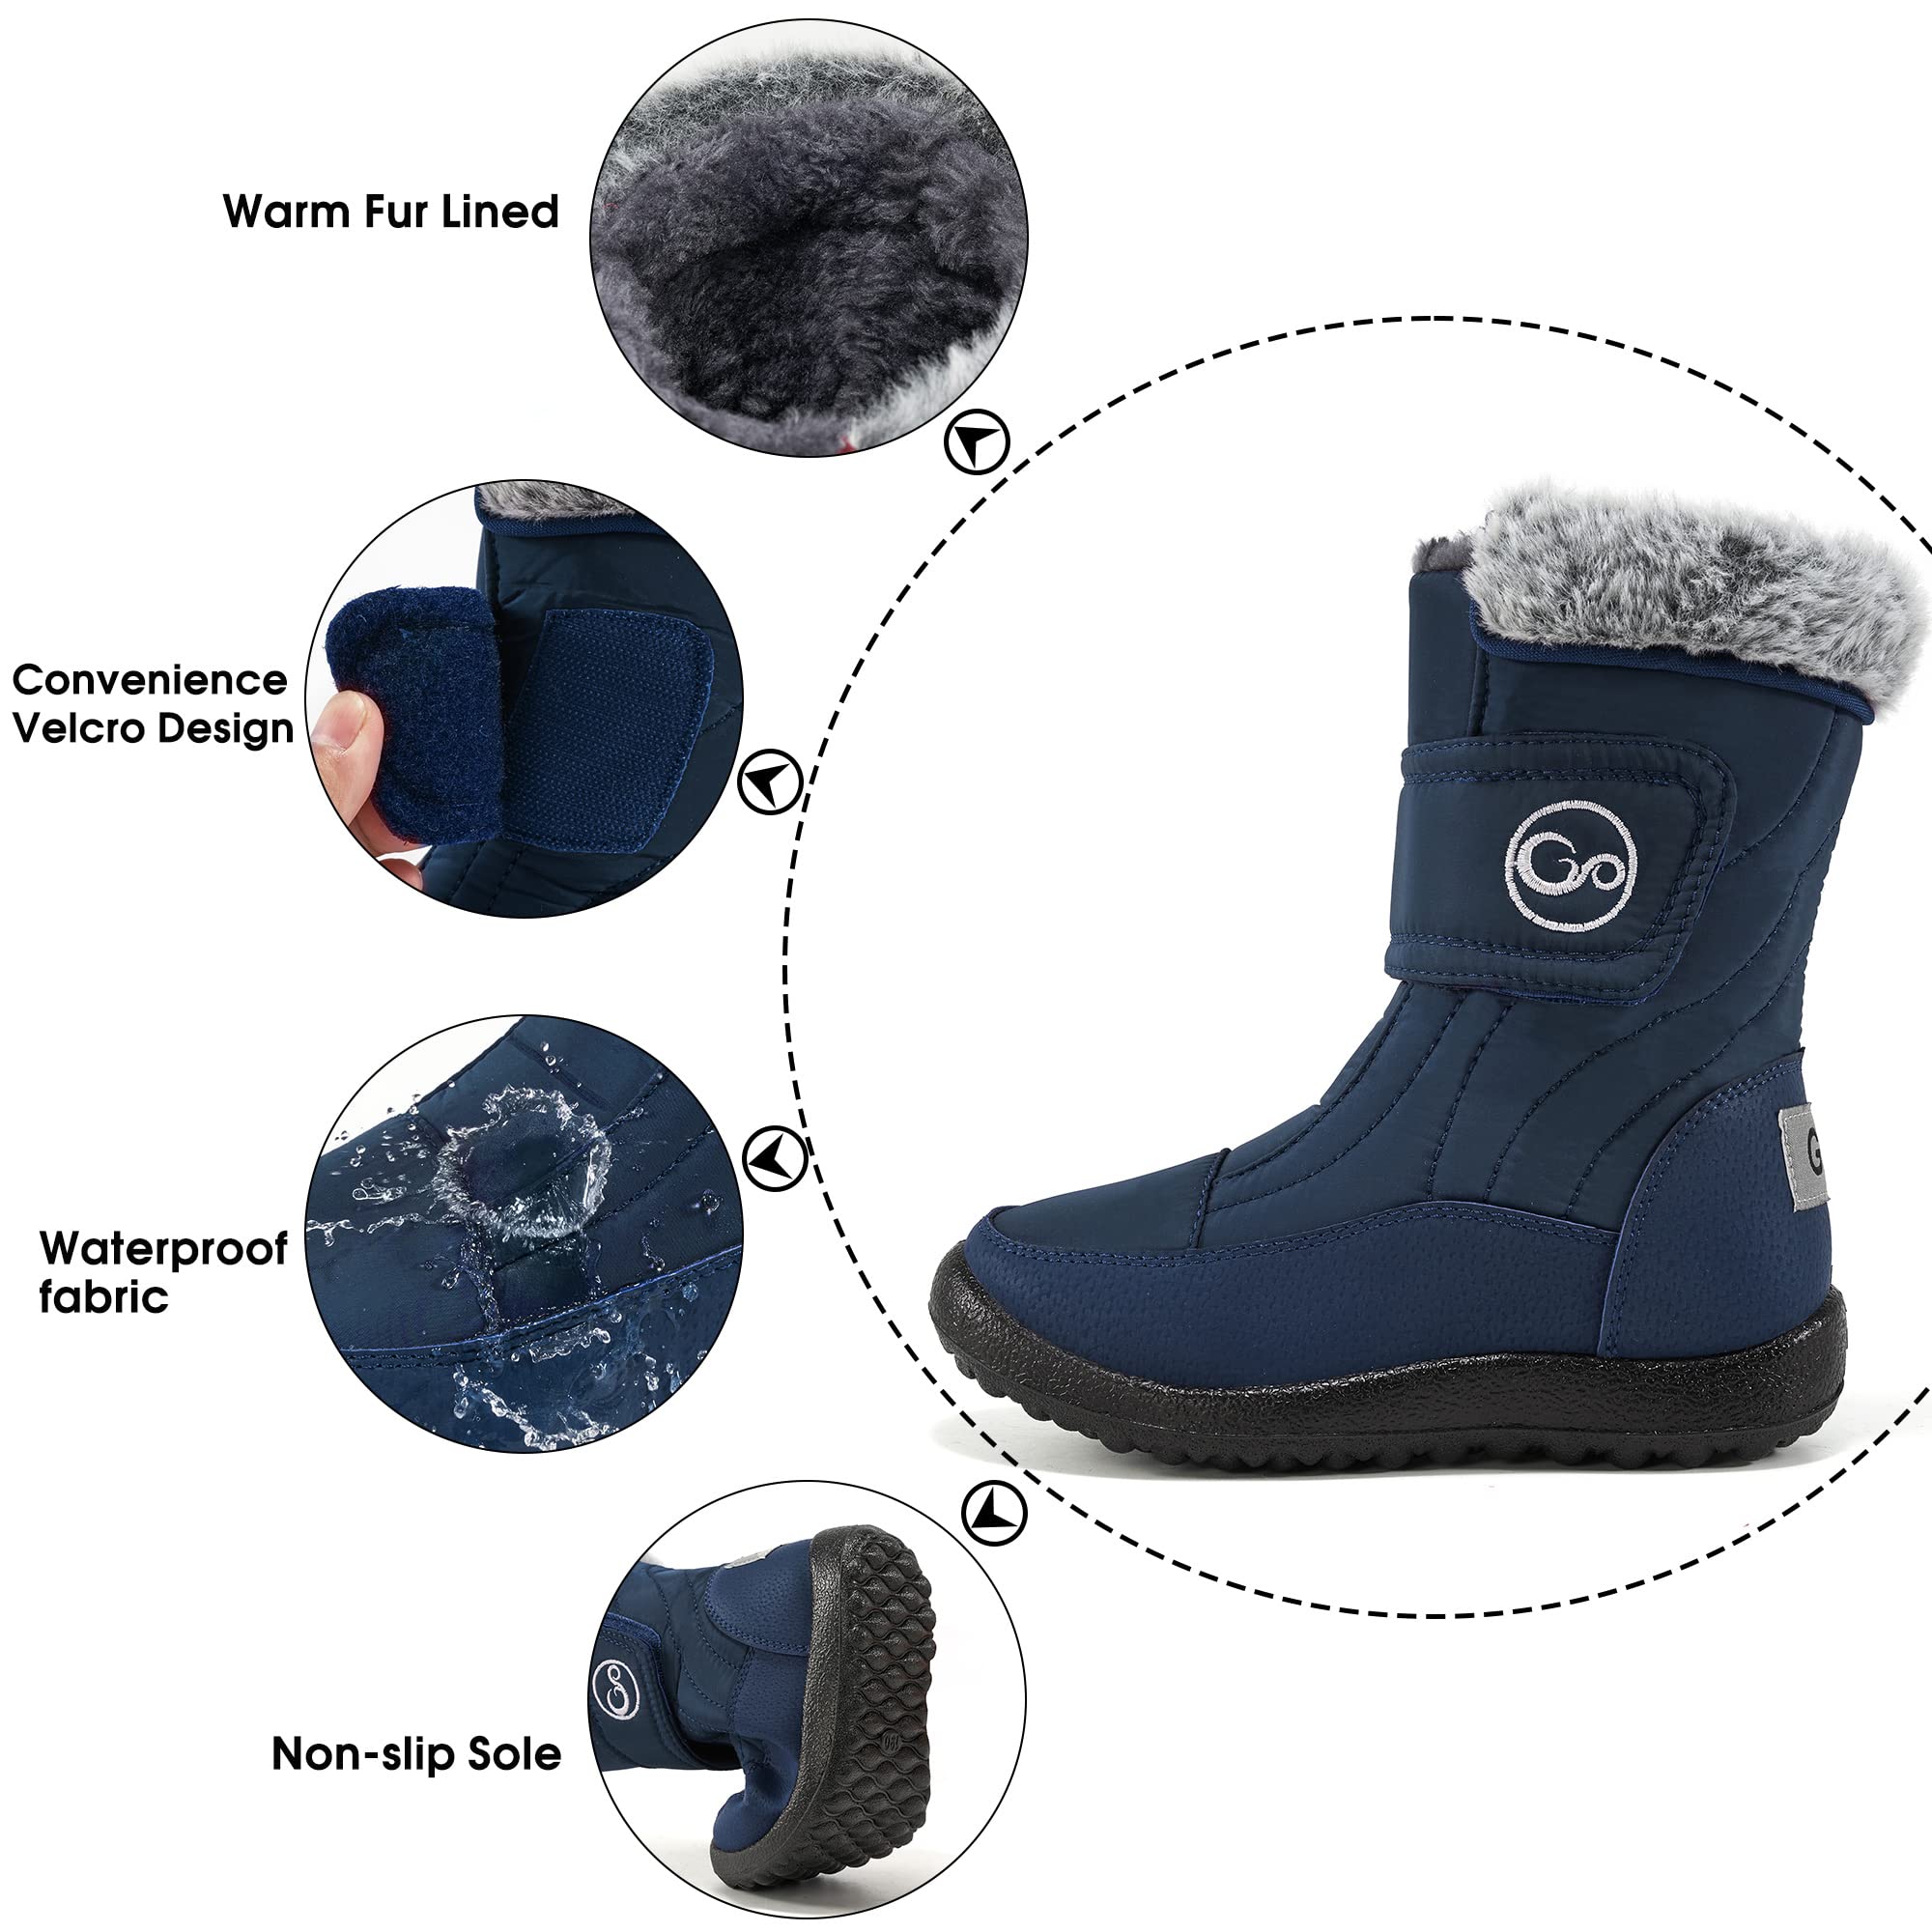 HARENCE Girls Winter Boots Boys Fashion Boots With Fur Lining Warm Toddler Snow Boots Outdoor Waterproof Slip Resistant Shoes For Kids Hook Loop Mid Calf Boot